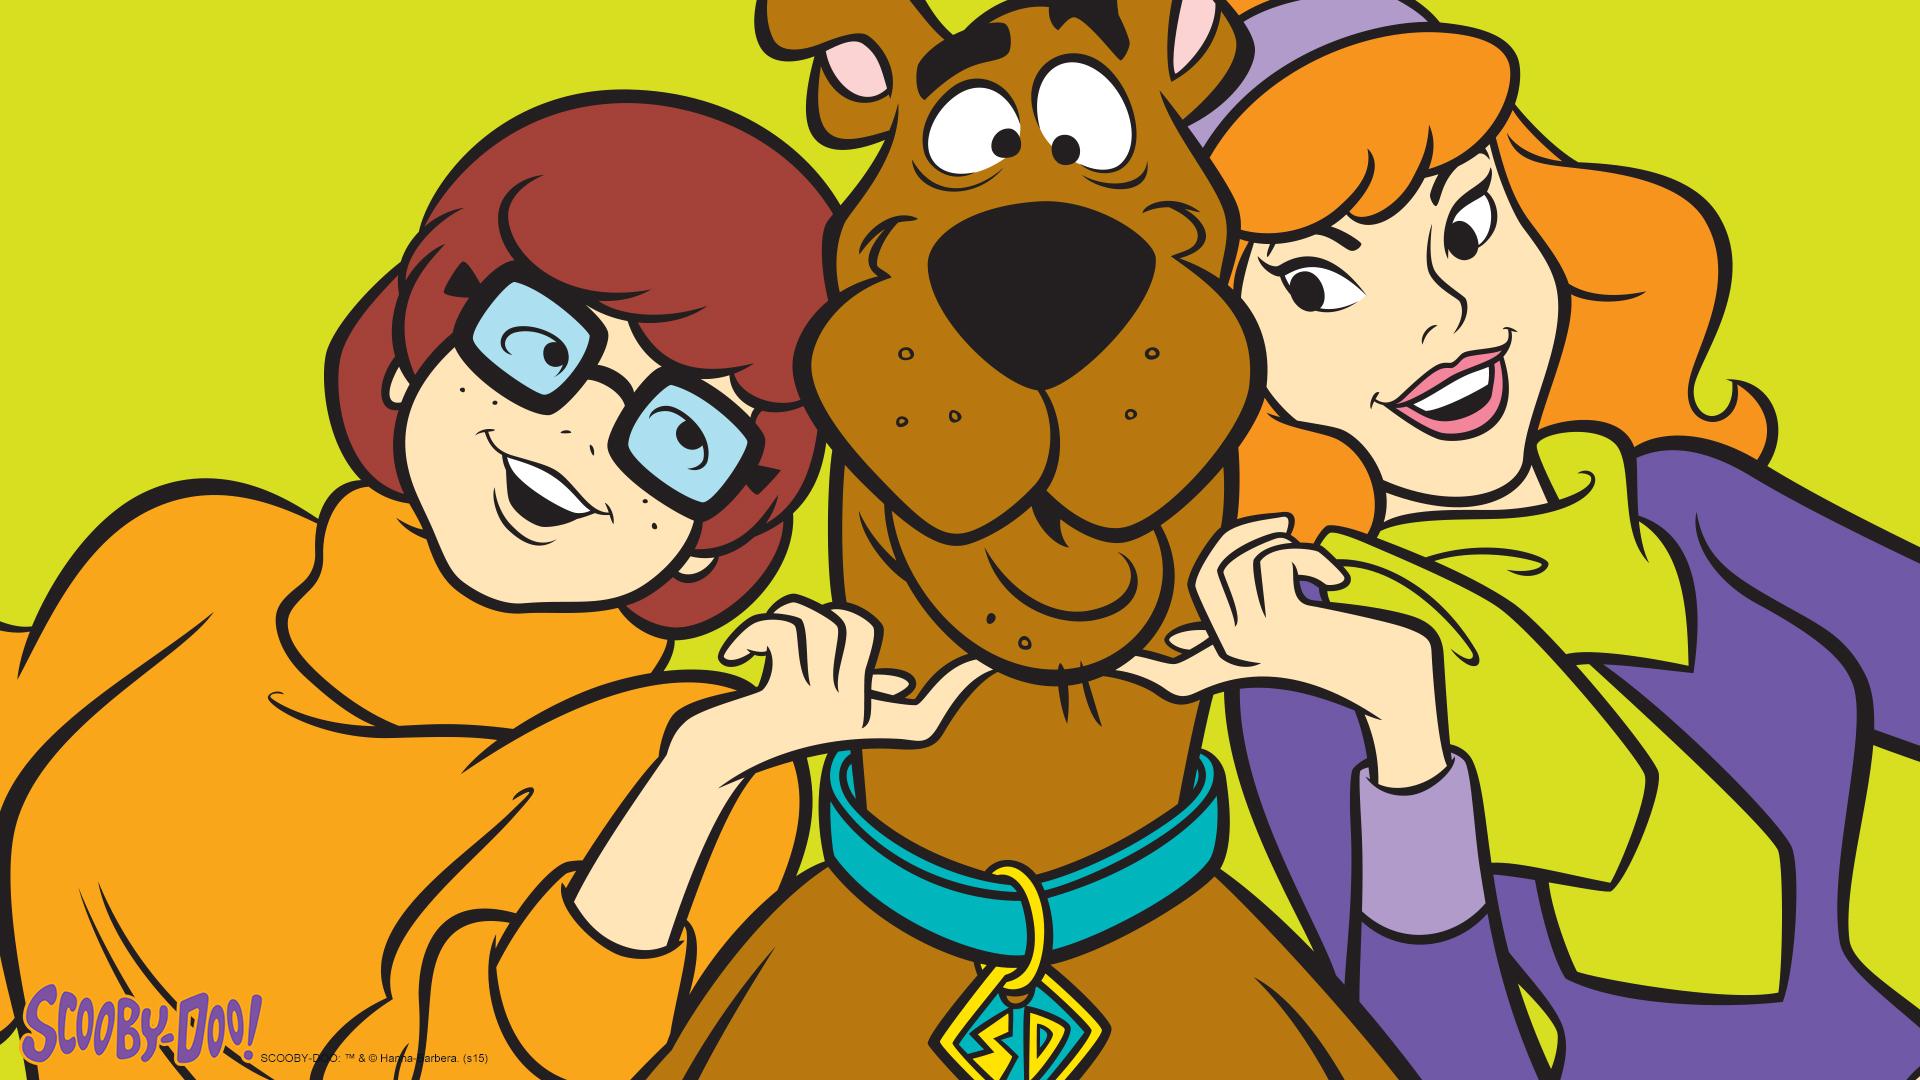 Scooby Doo Image Velma And Daphne HD Wallpaper And Background